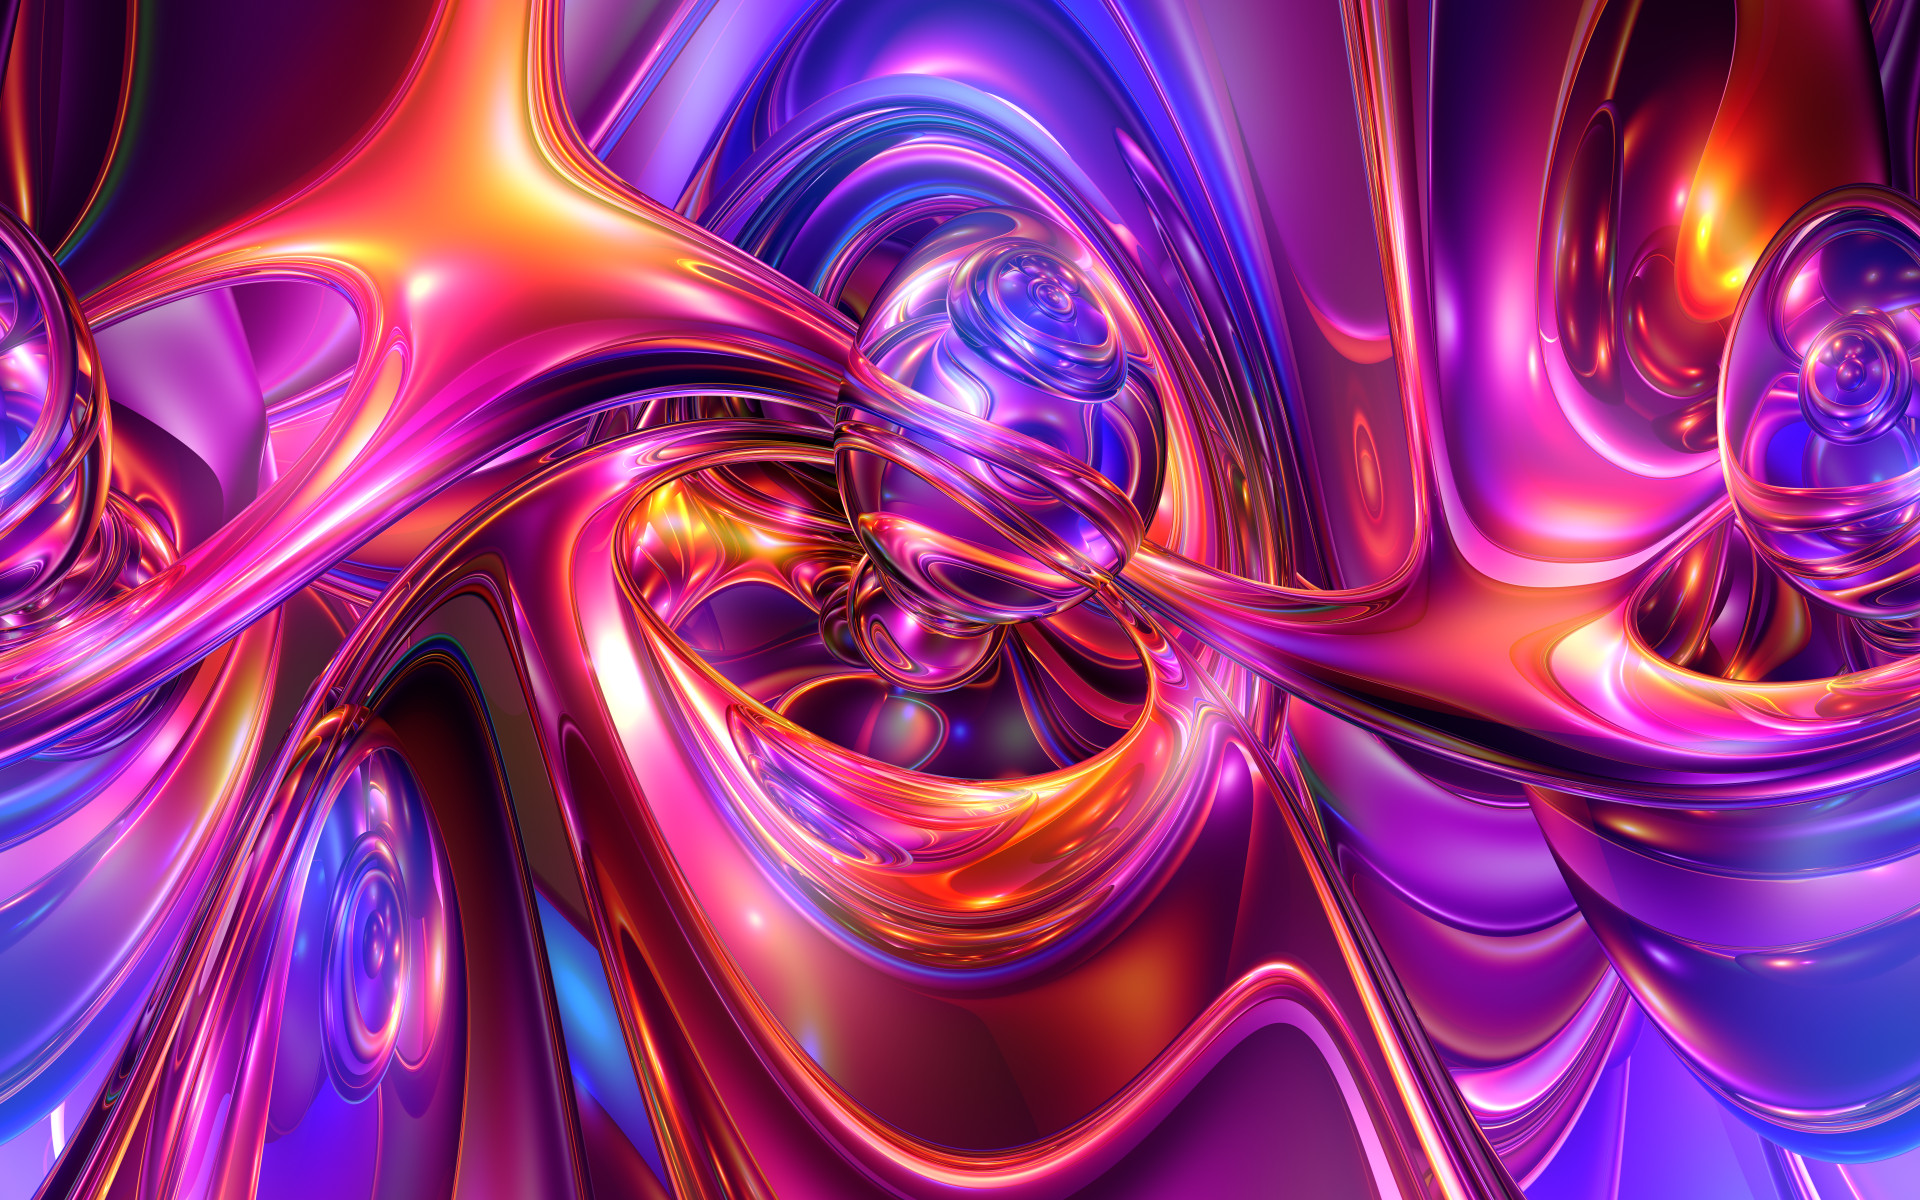 HD desktop wallpaper: Abstract, Pink, 3D, Colors, Purple, Colorful, Swirl, Cgi download free picture